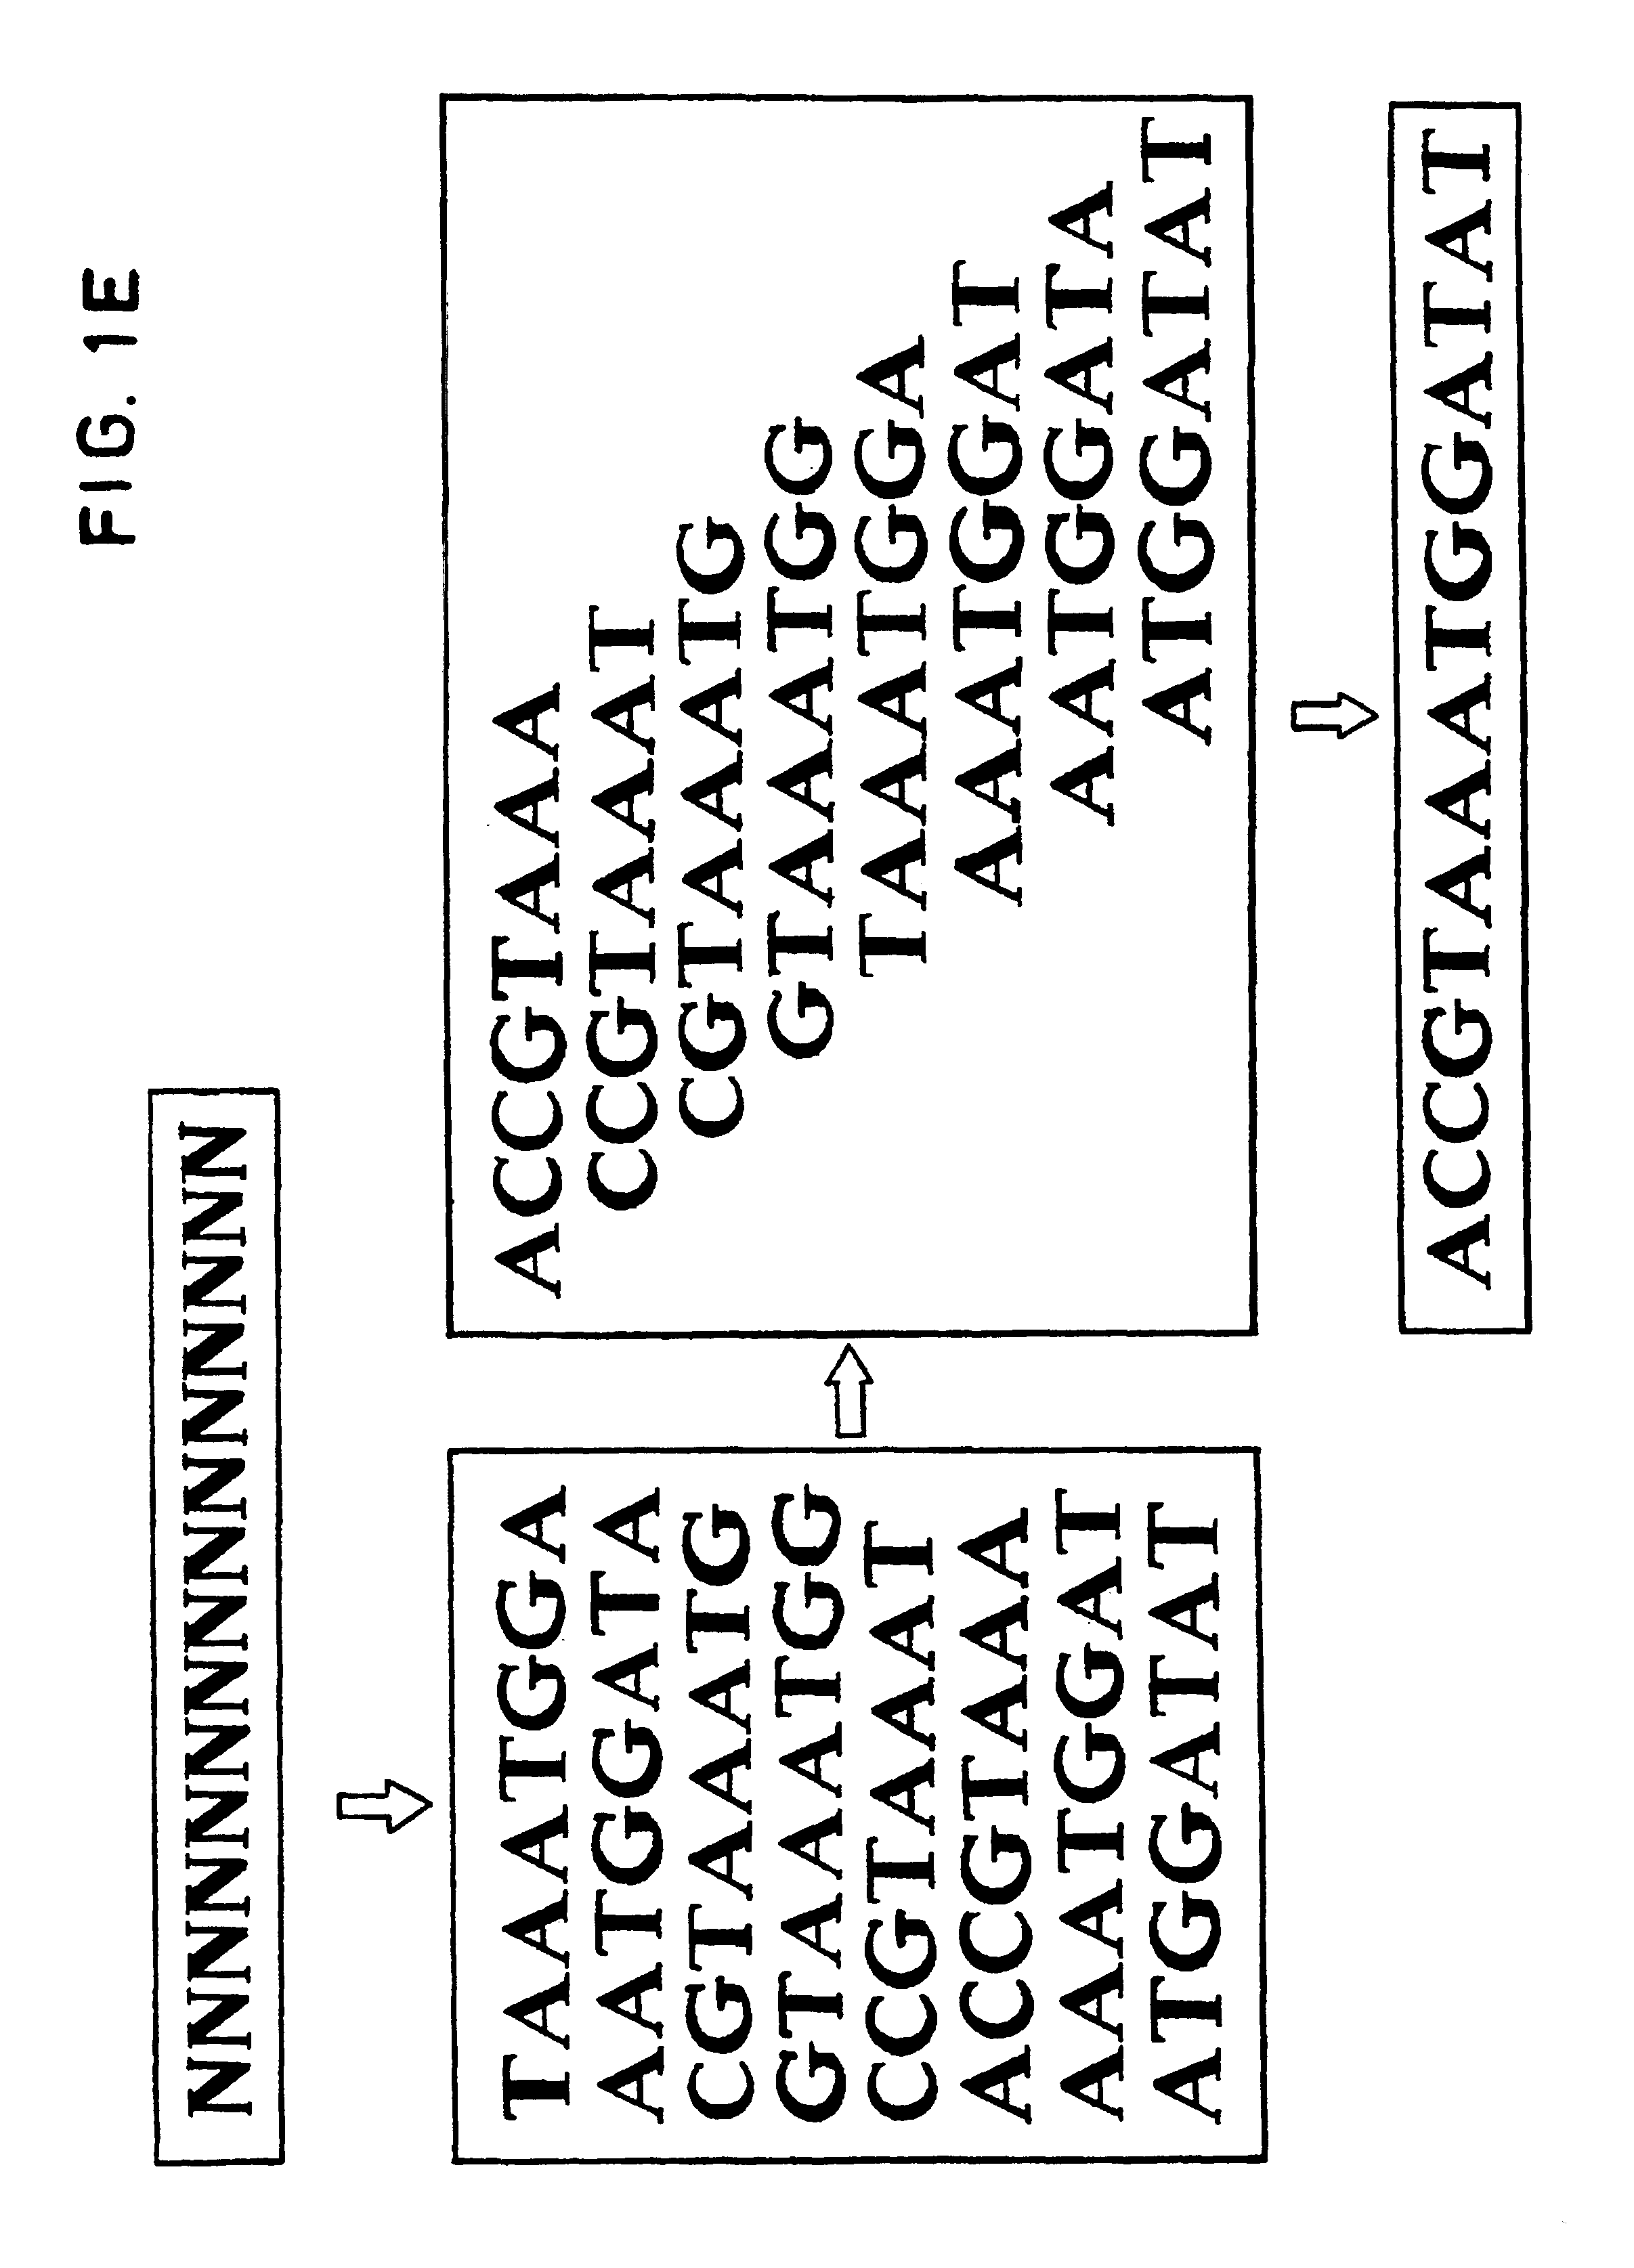 Computer-aided analysis system for sequencing by hybridization